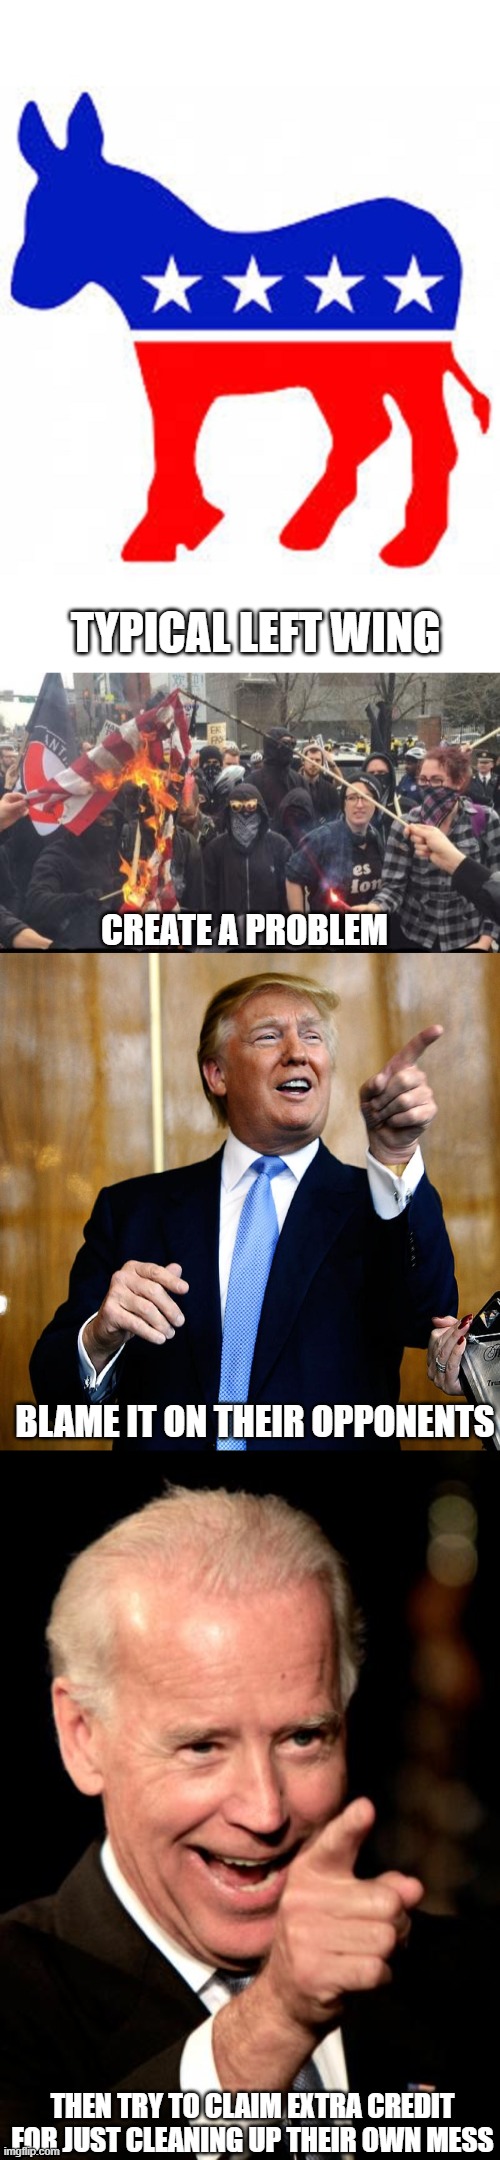 US Democrat party in a nutshell | TYPICAL LEFT WING; CREATE A PROBLEM; BLAME IT ON THEIR OPPONENTS; THEN TRY TO CLAIM EXTRA CREDIT FOR JUST CLEANING UP THEIR OWN MESS | image tagged in democrat donkey,antifa democrat leftist terrorist,donal trump birthday,memes,smilin biden,2020 elections | made w/ Imgflip meme maker